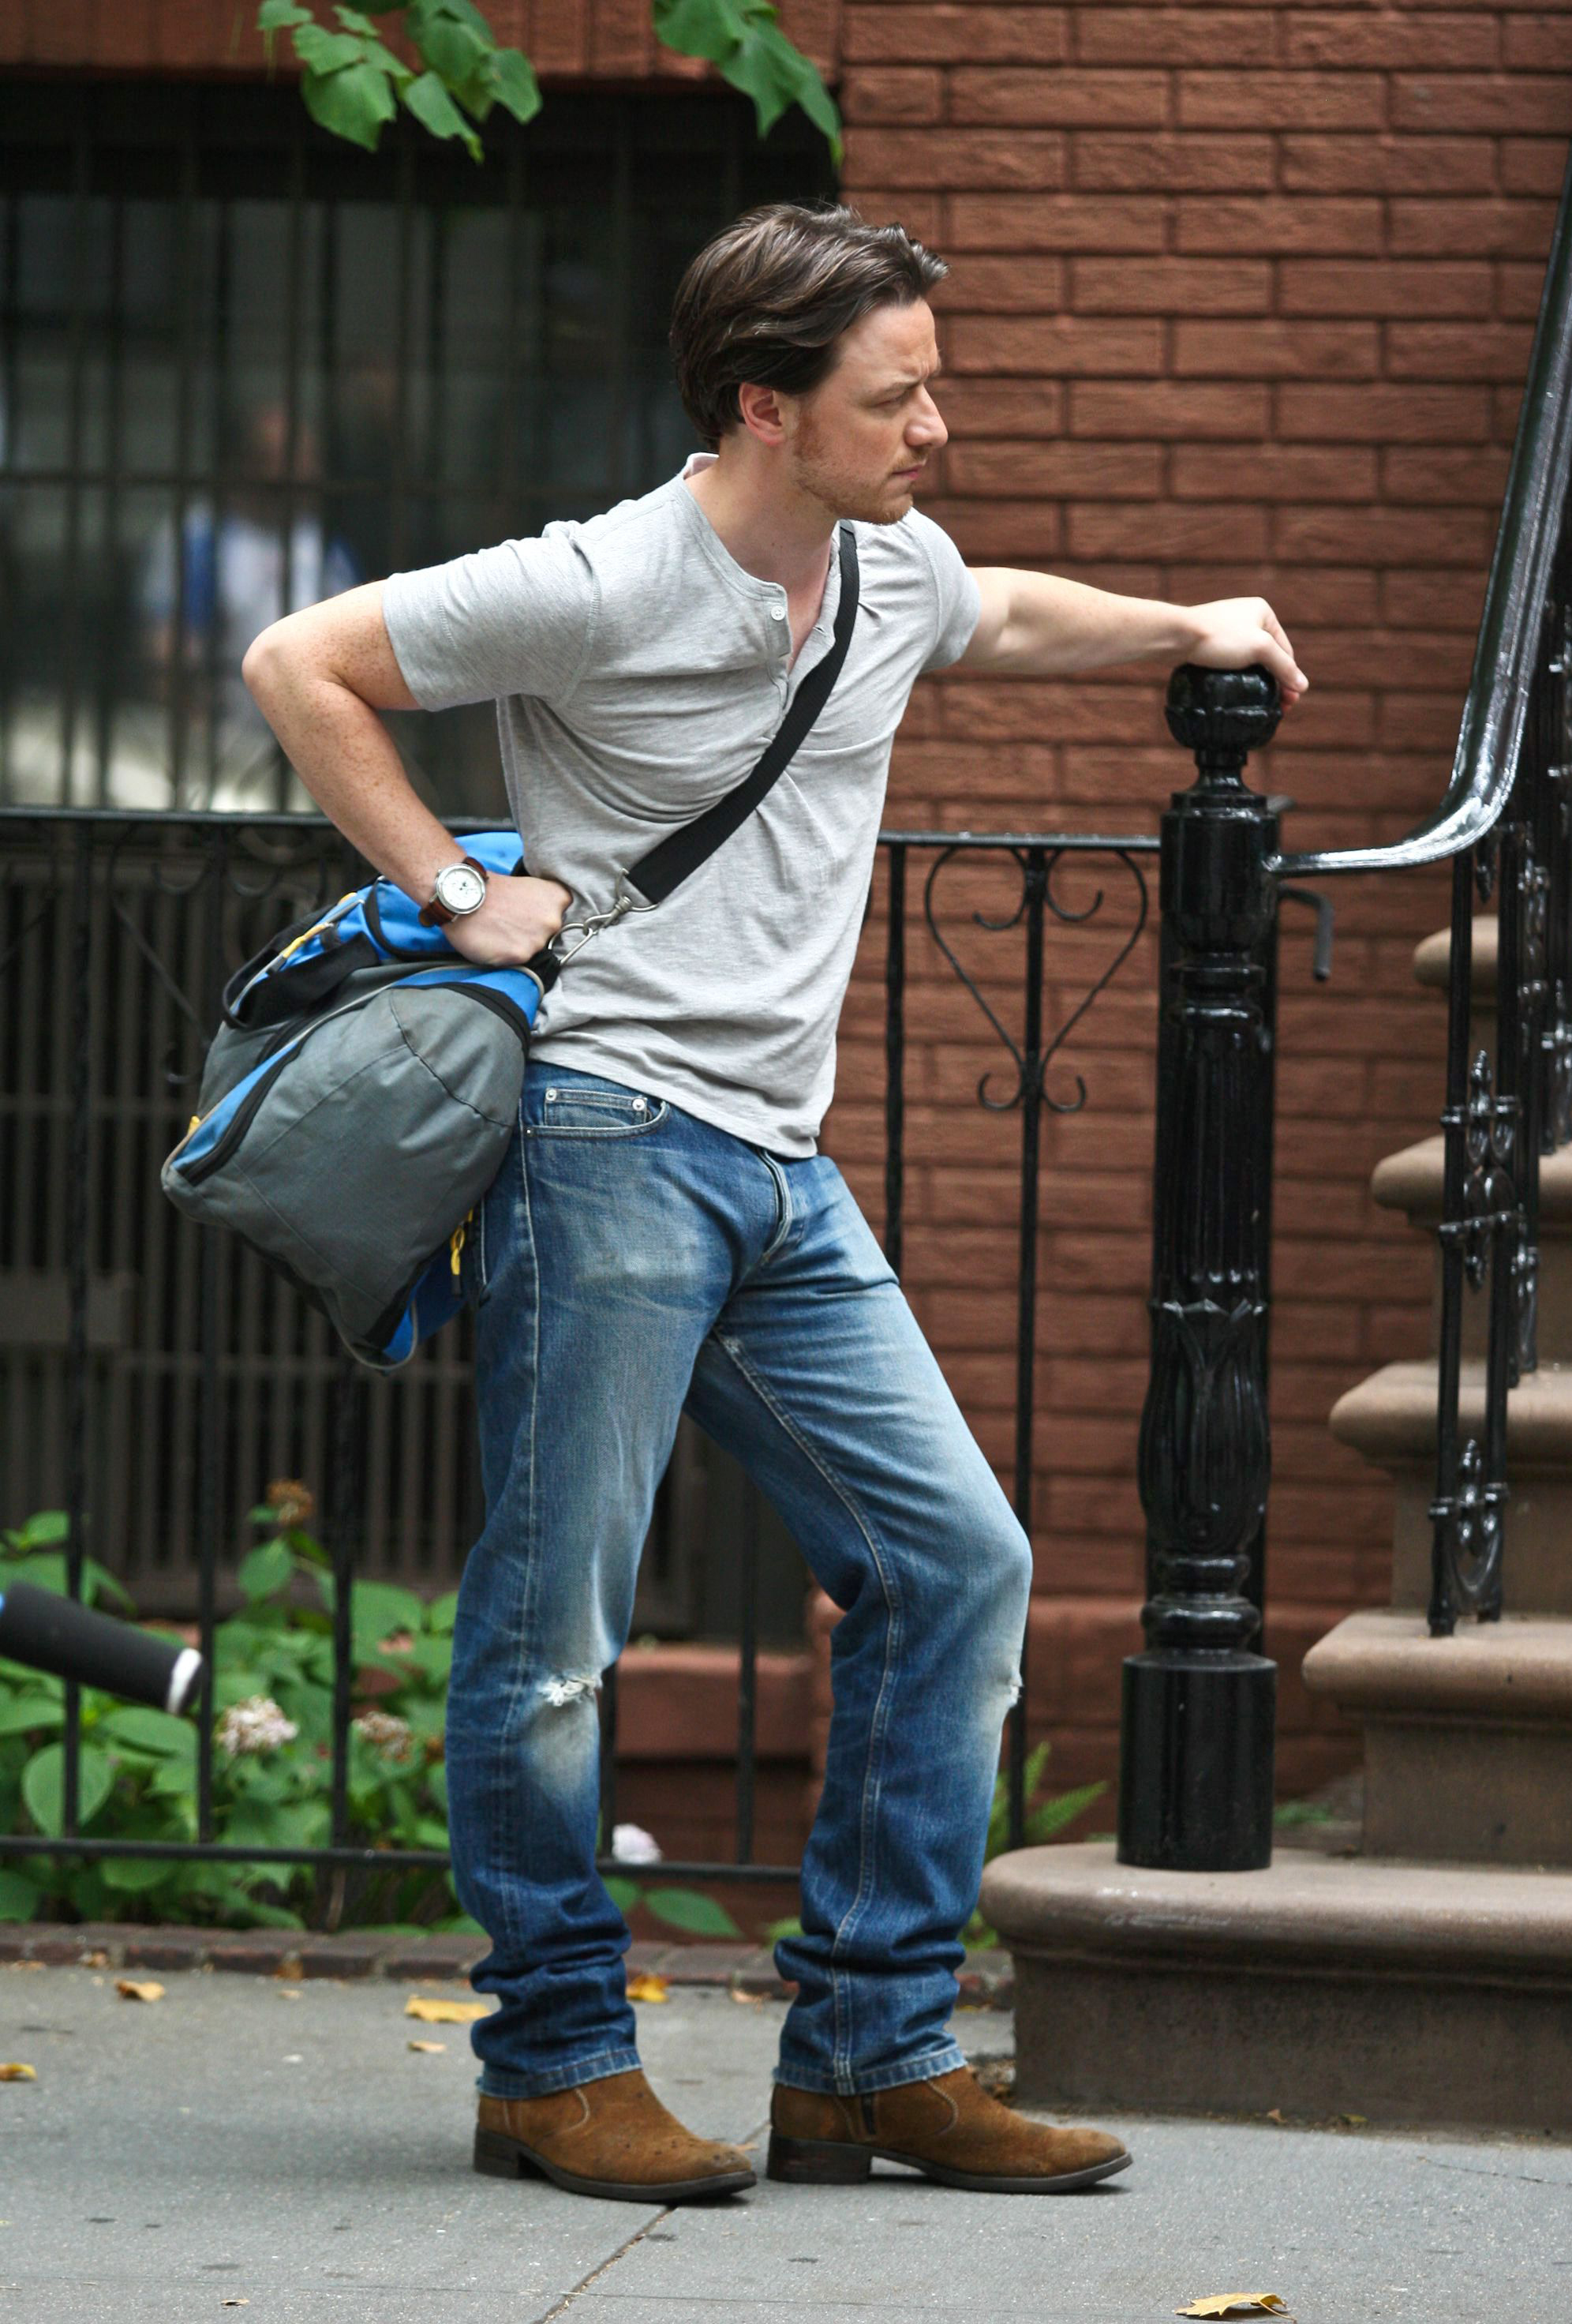 New pics from The Disappearance of Eleanor Rigby